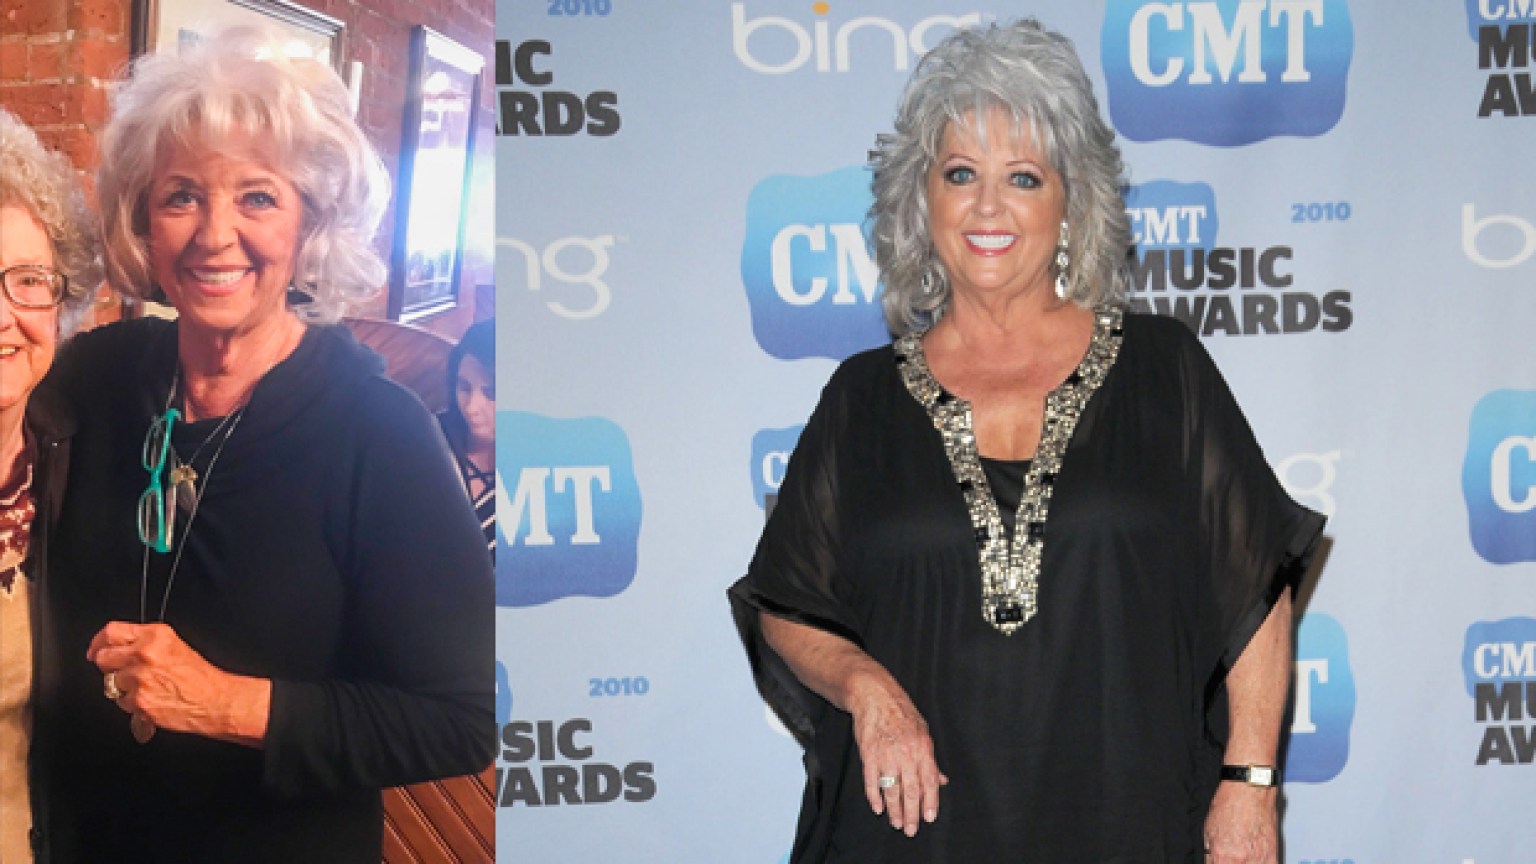 Paula Deen’s Weight Loss Loses 40 Pounds & Looks Half Her Size